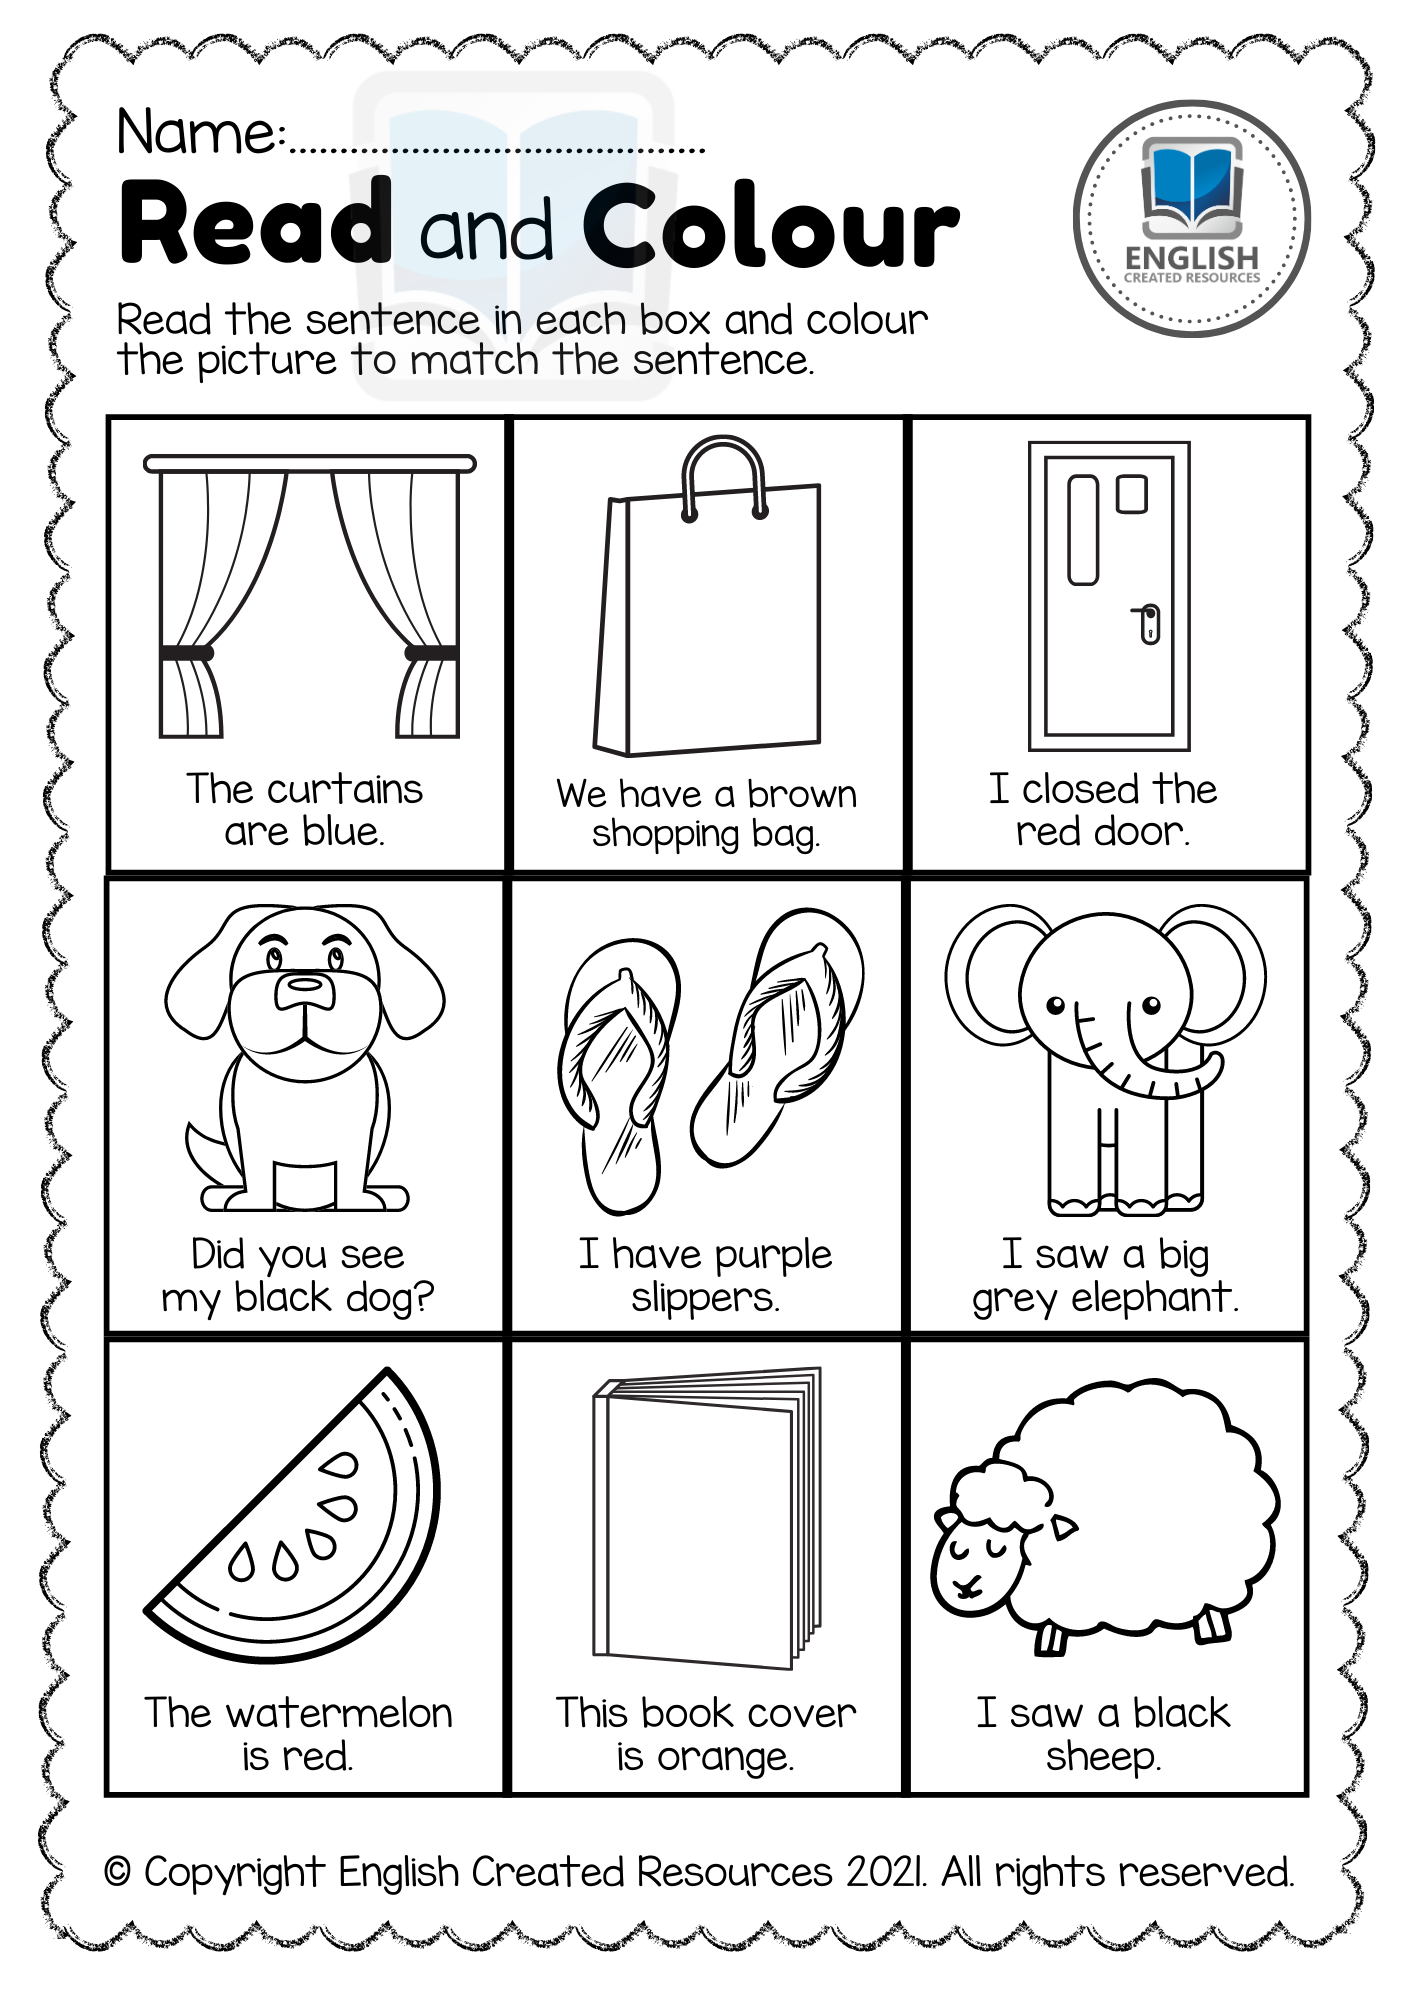 read-and-colour-worksheets-kg-grade-1-english-created-resources